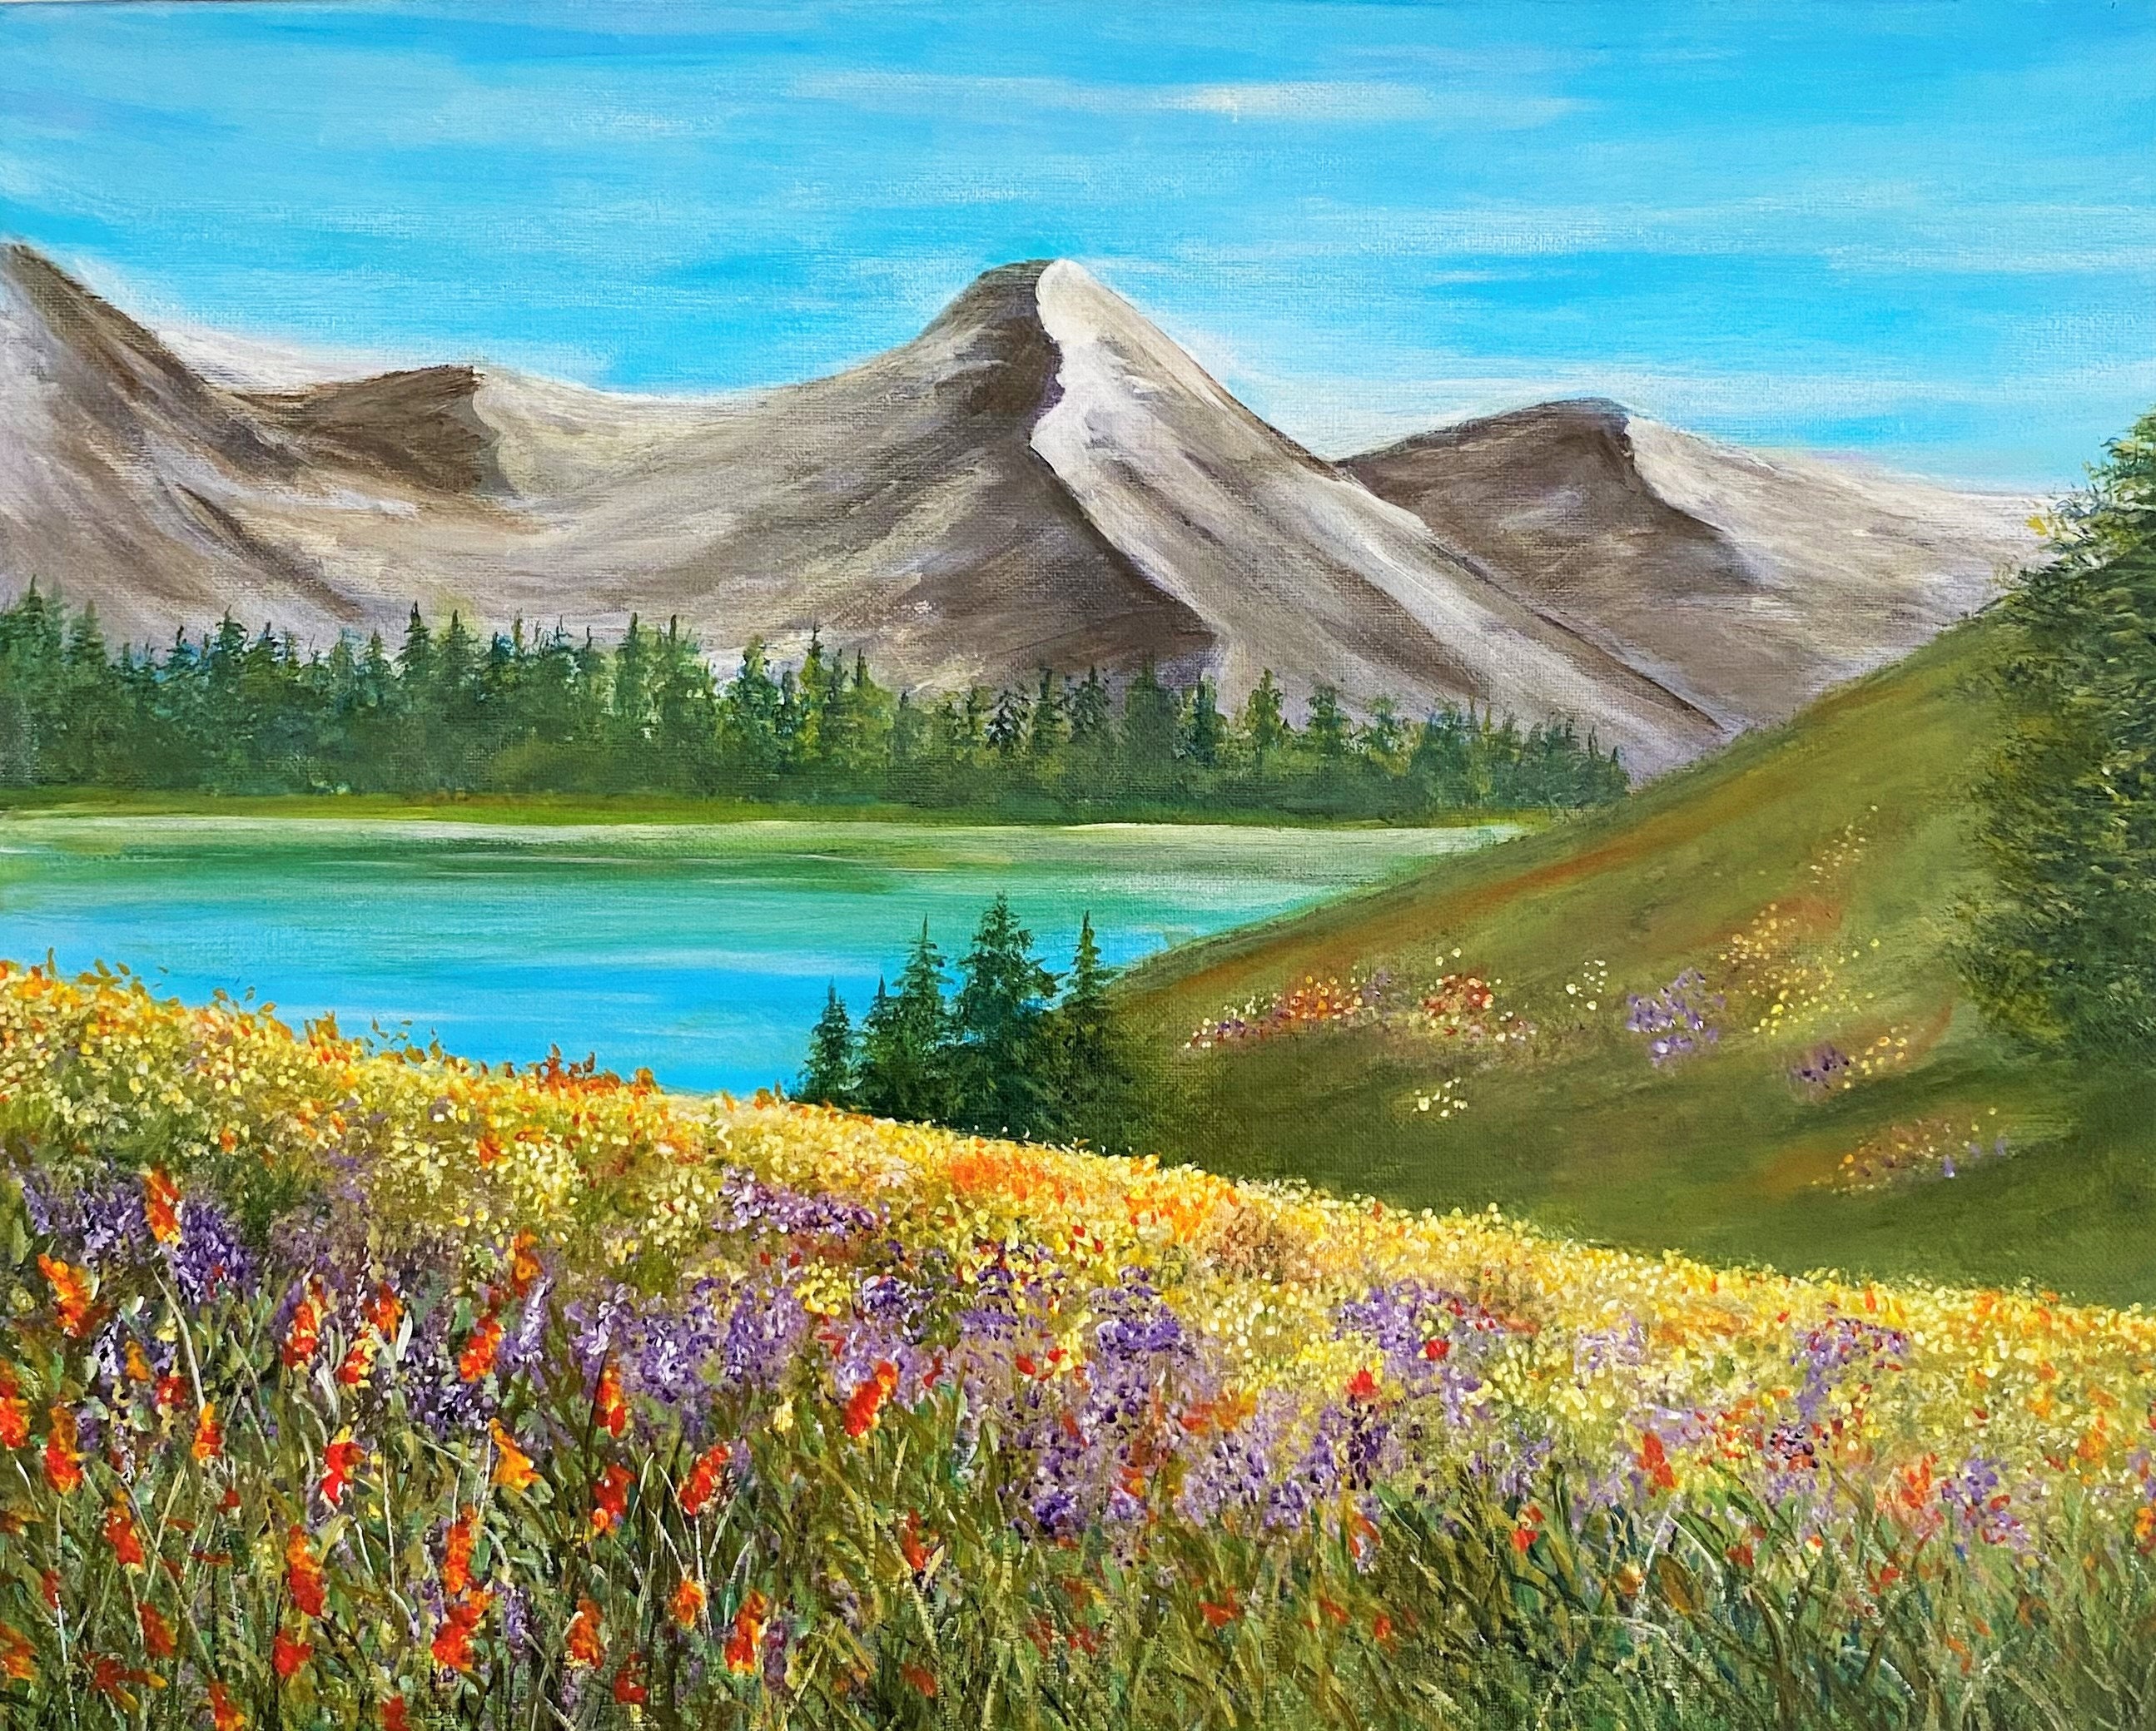 Mountain scenery painting